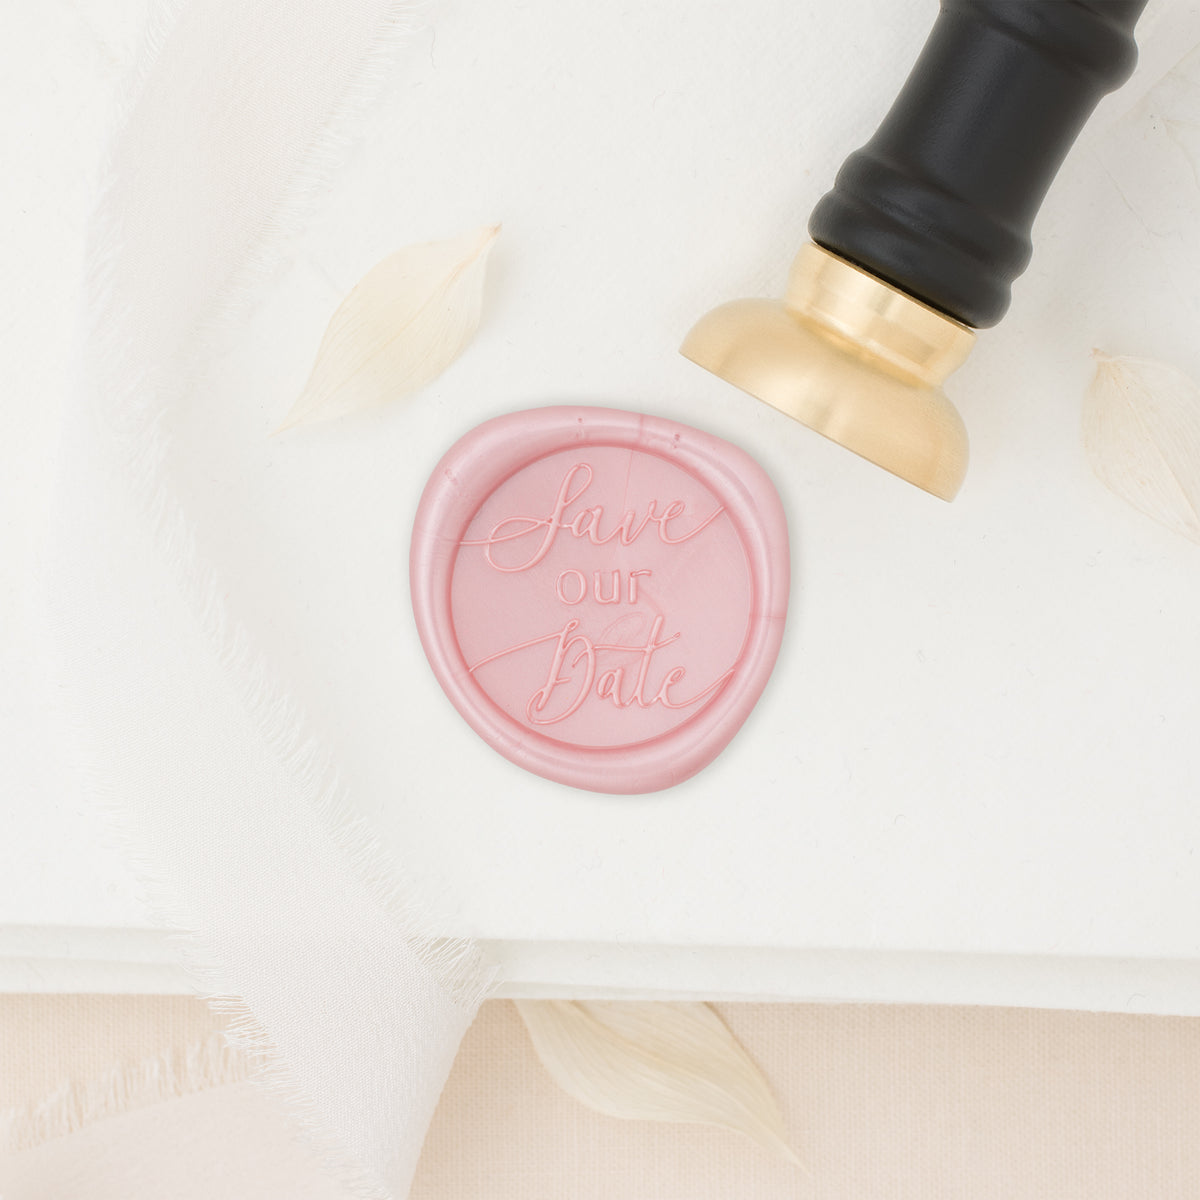 Save Our Date Script Wax Stamp